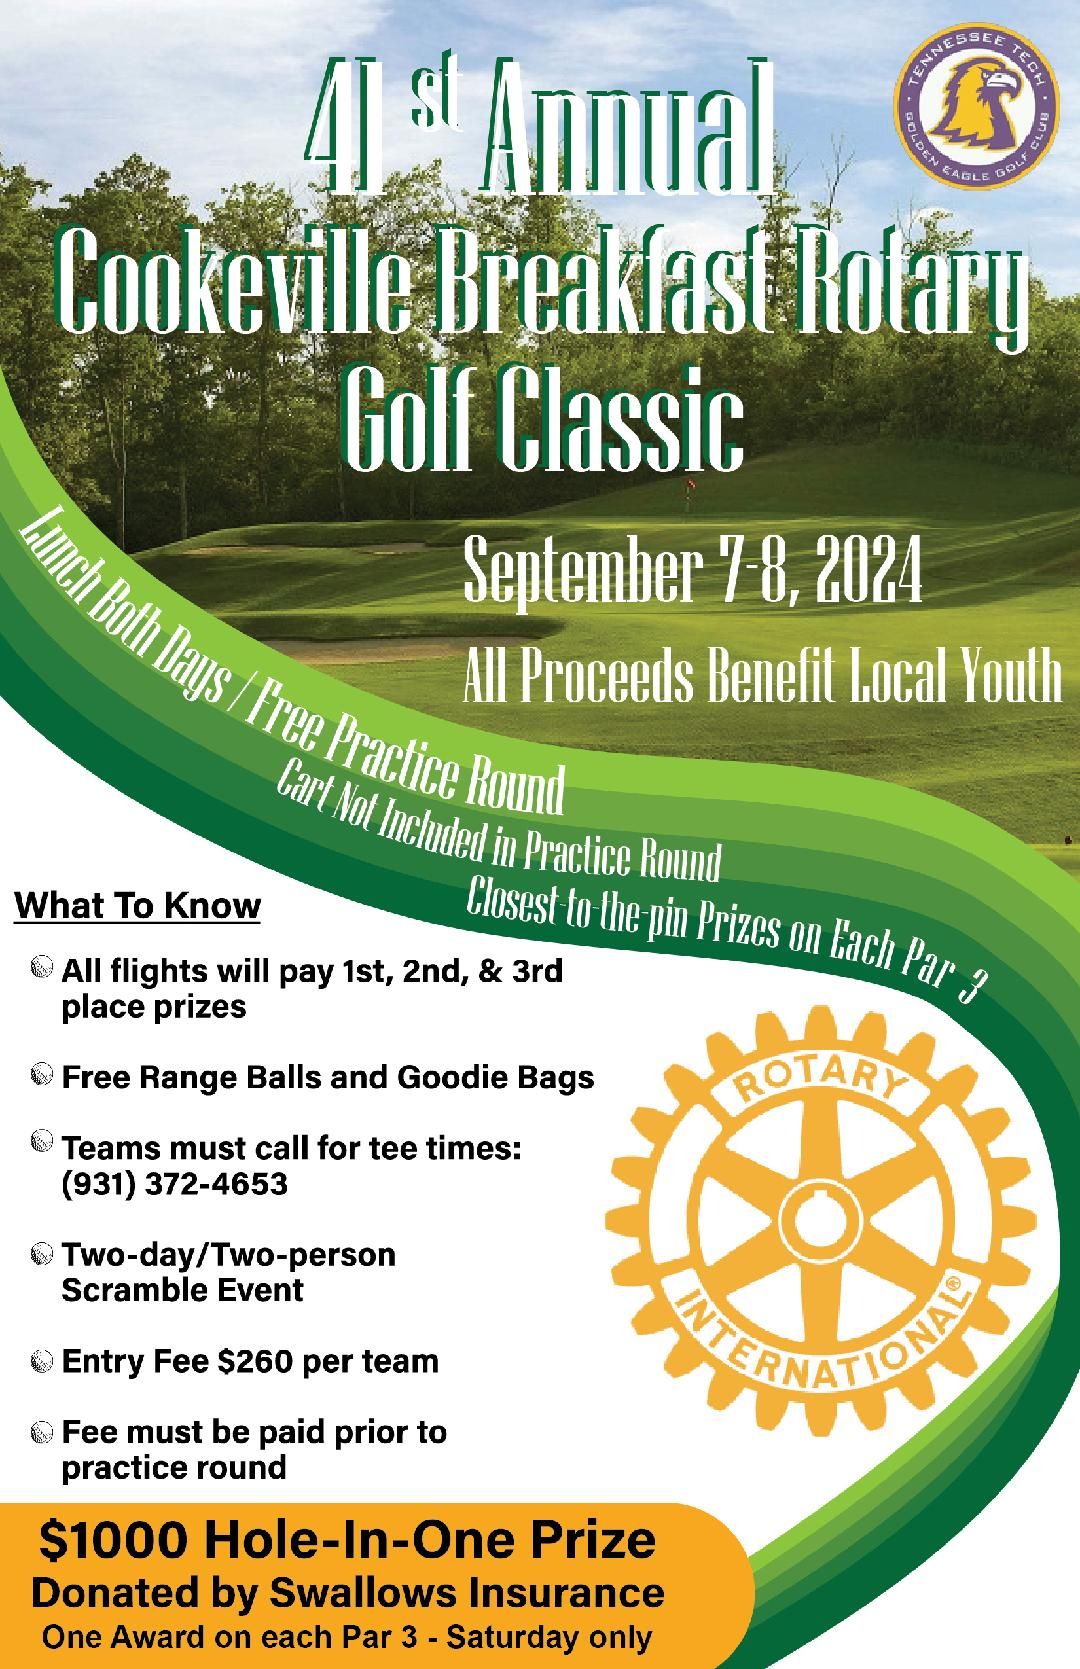 41st Annual Cookeville Breakfast Rotary Golf Classic